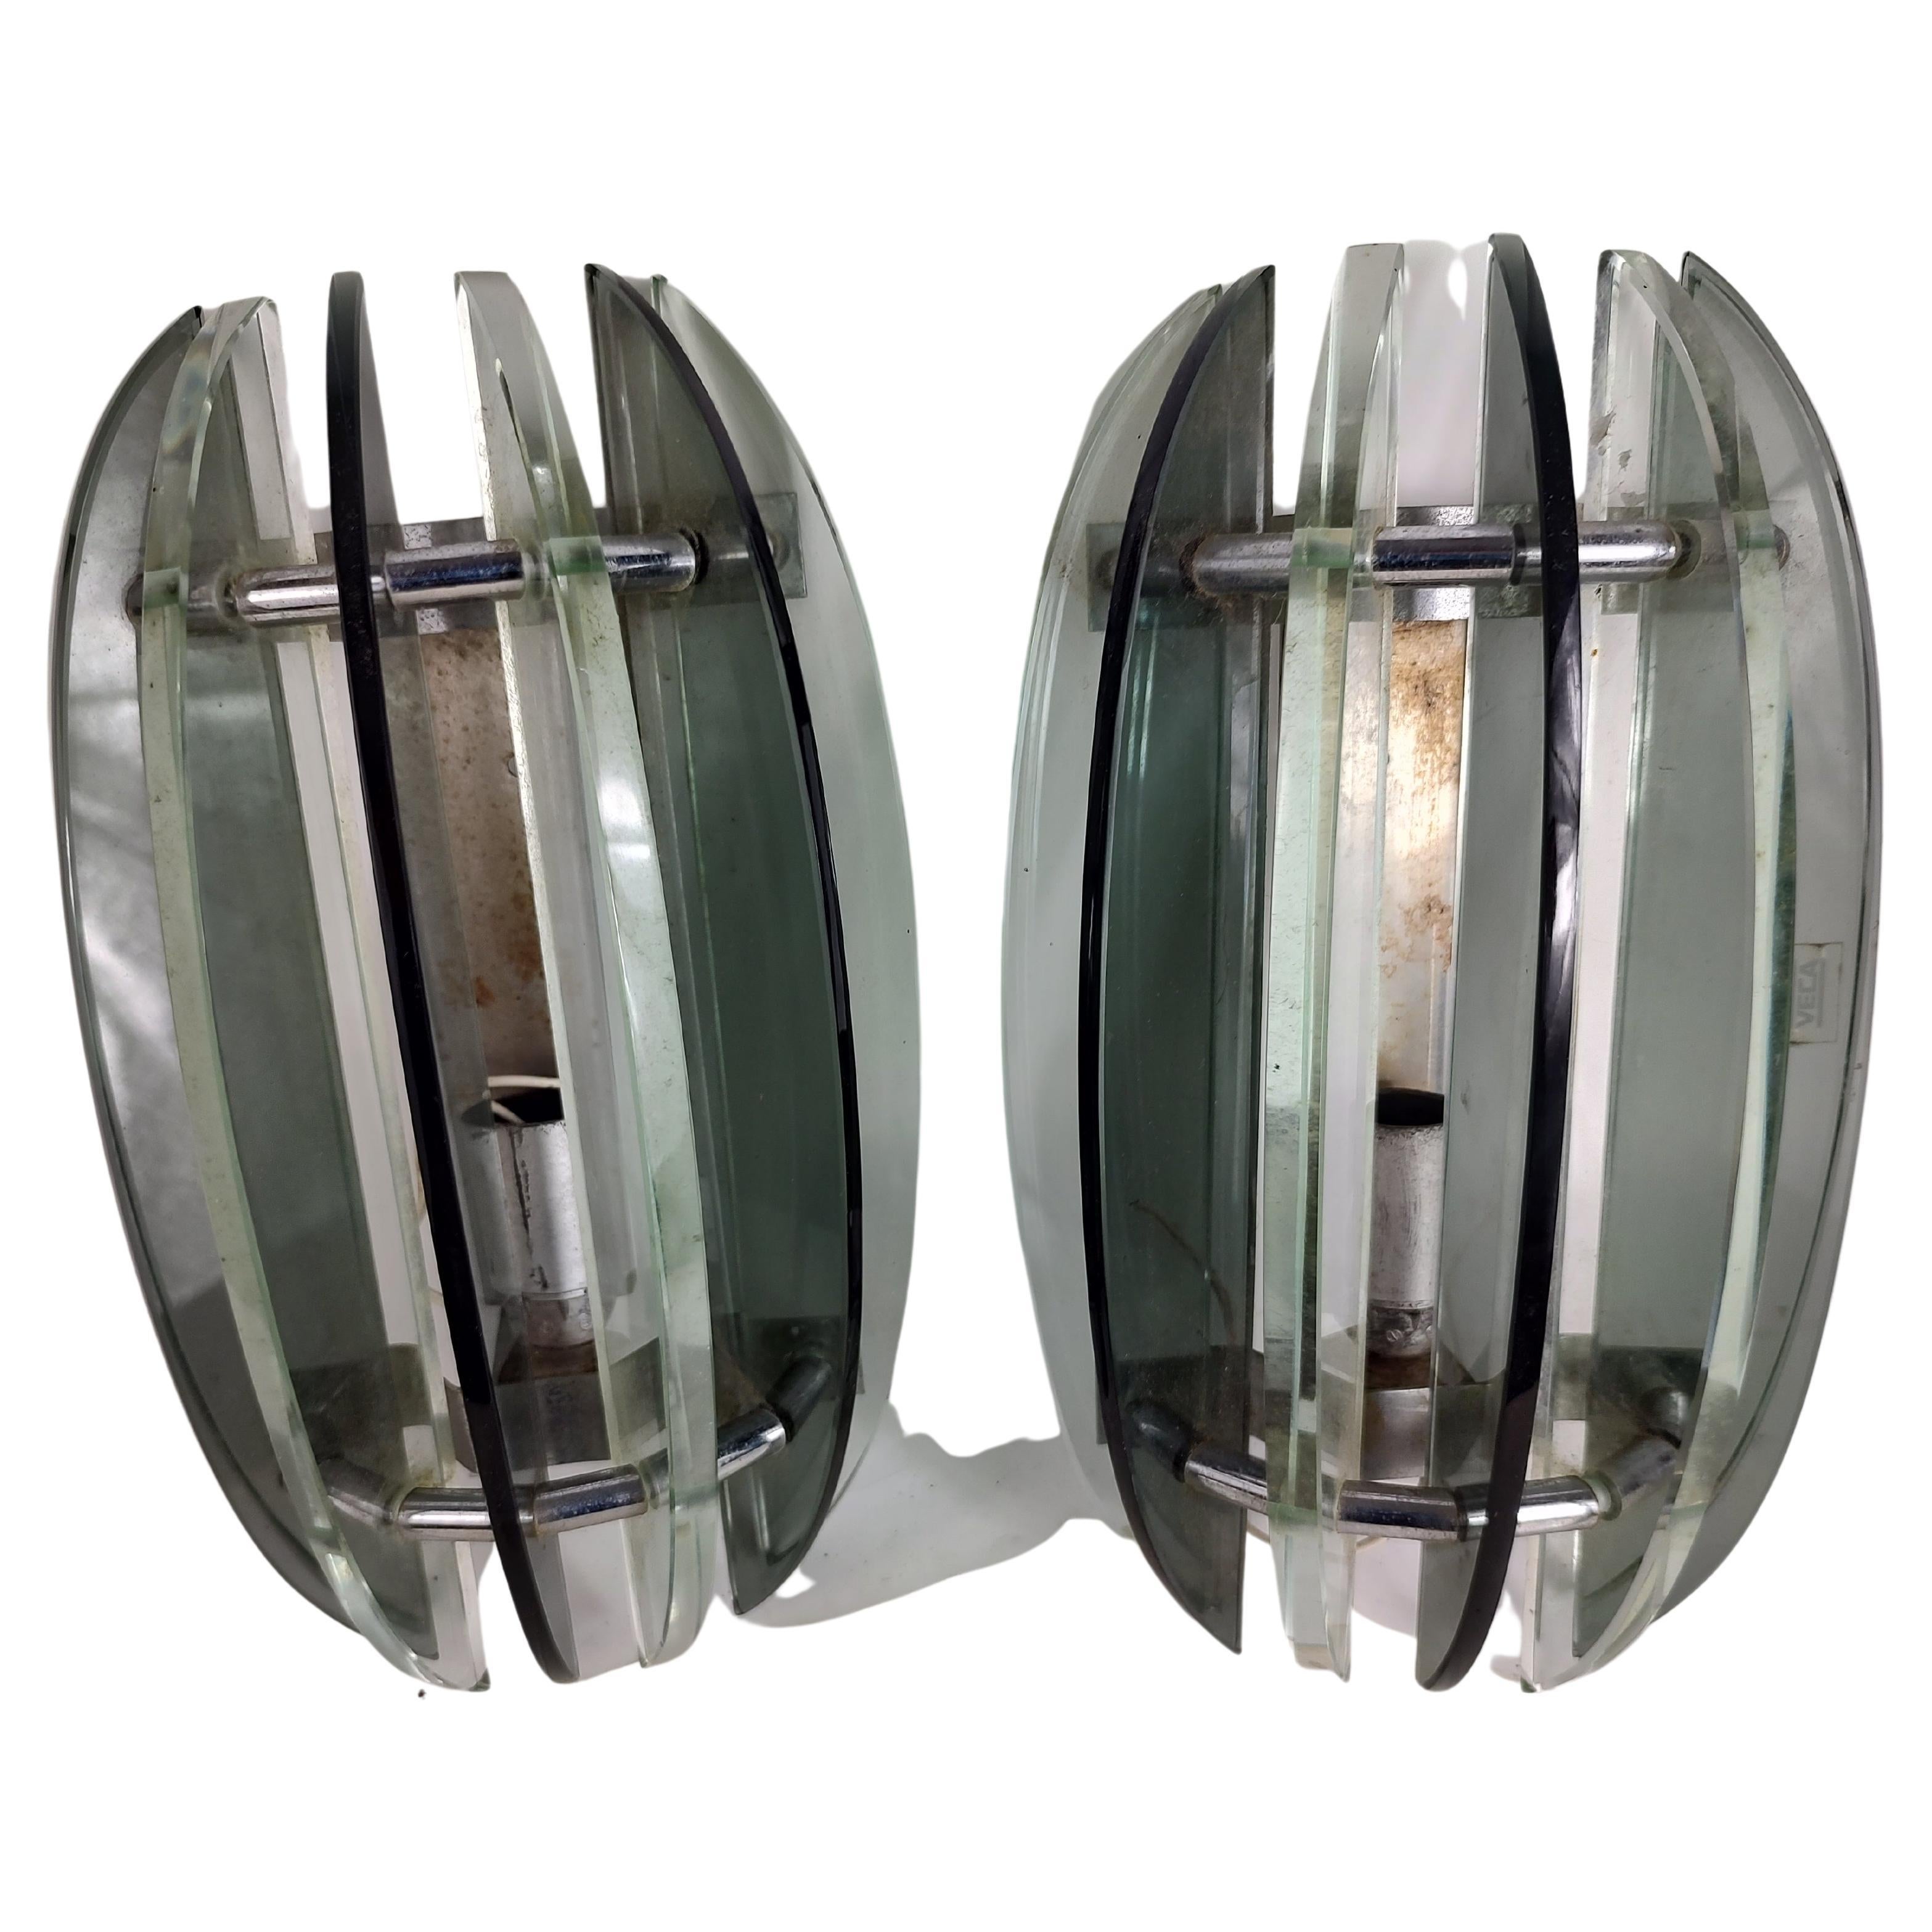 Mid-Century Modern Pair of Art Glass Wall Sconces by Veca Italy c1955 For Sale 1